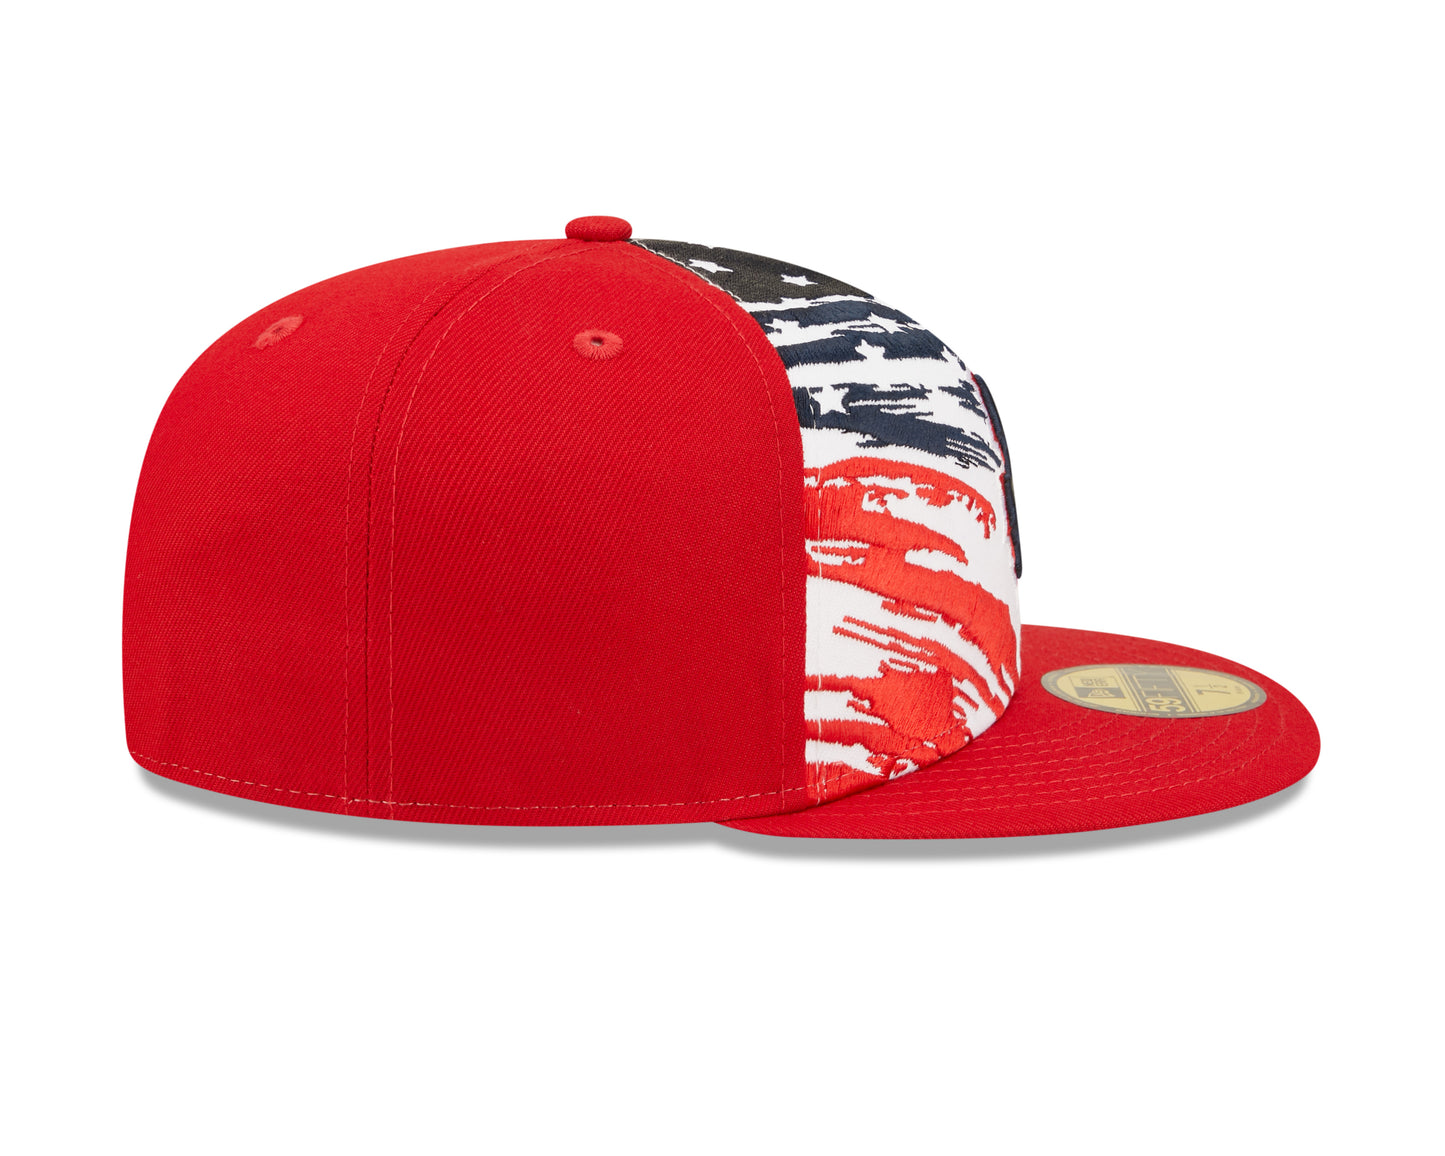 San Francisco Giants Stars and Stripes July 4th 59fifty Fitted Hats